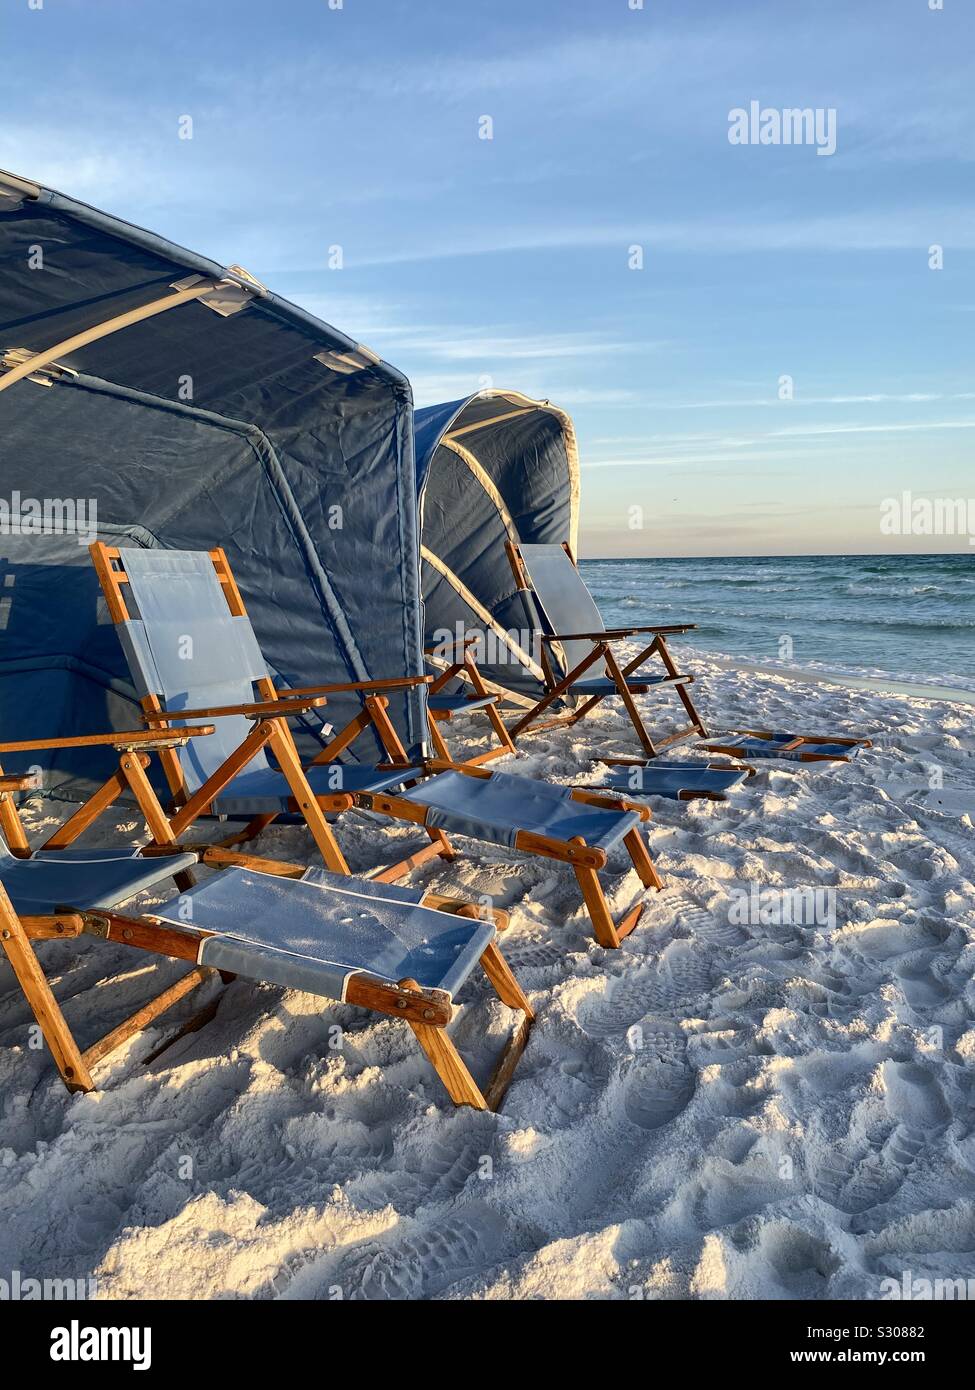 Blue beach tents and lounge chairs on white sand beach with water view Stock Photo